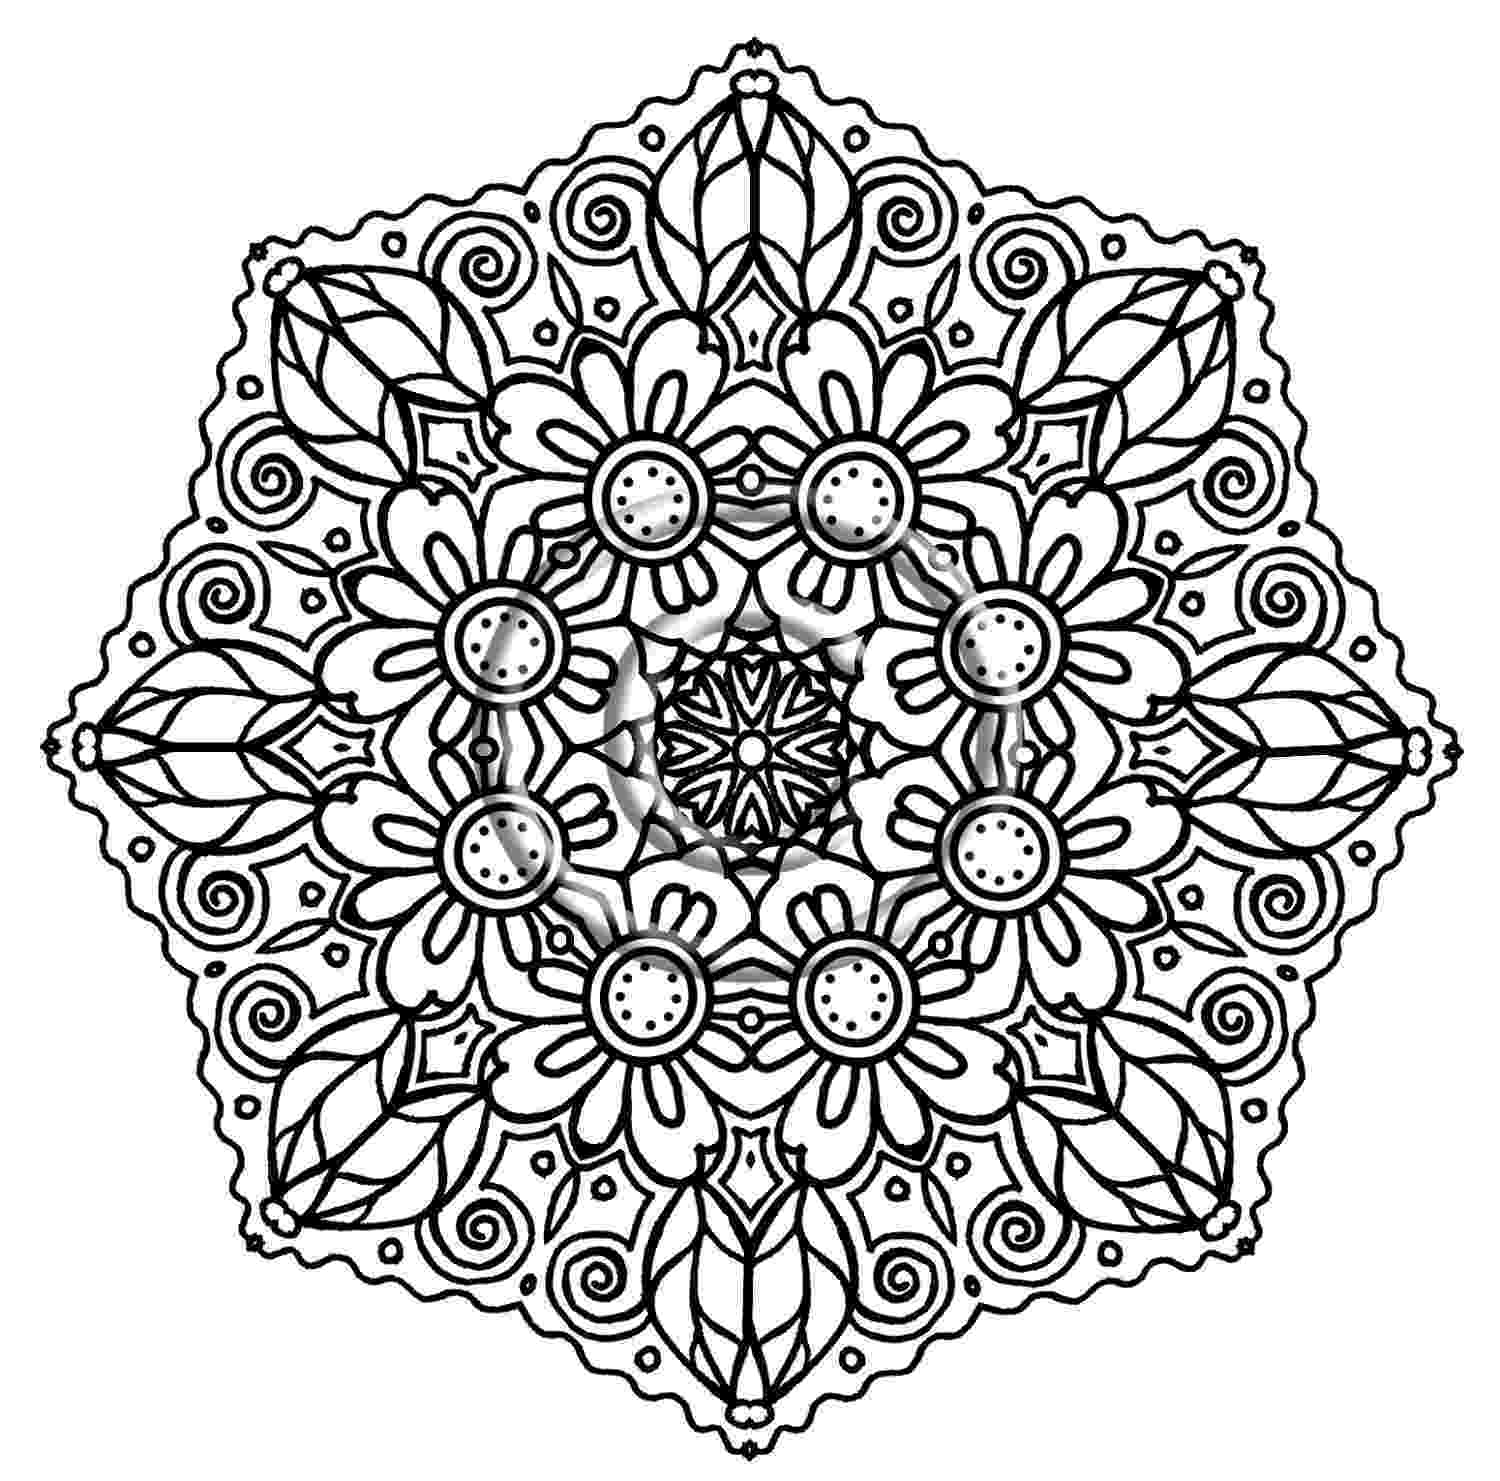 detailed flower coloring pages detailed flower coloring pages to download and print for free pages detailed coloring flower 